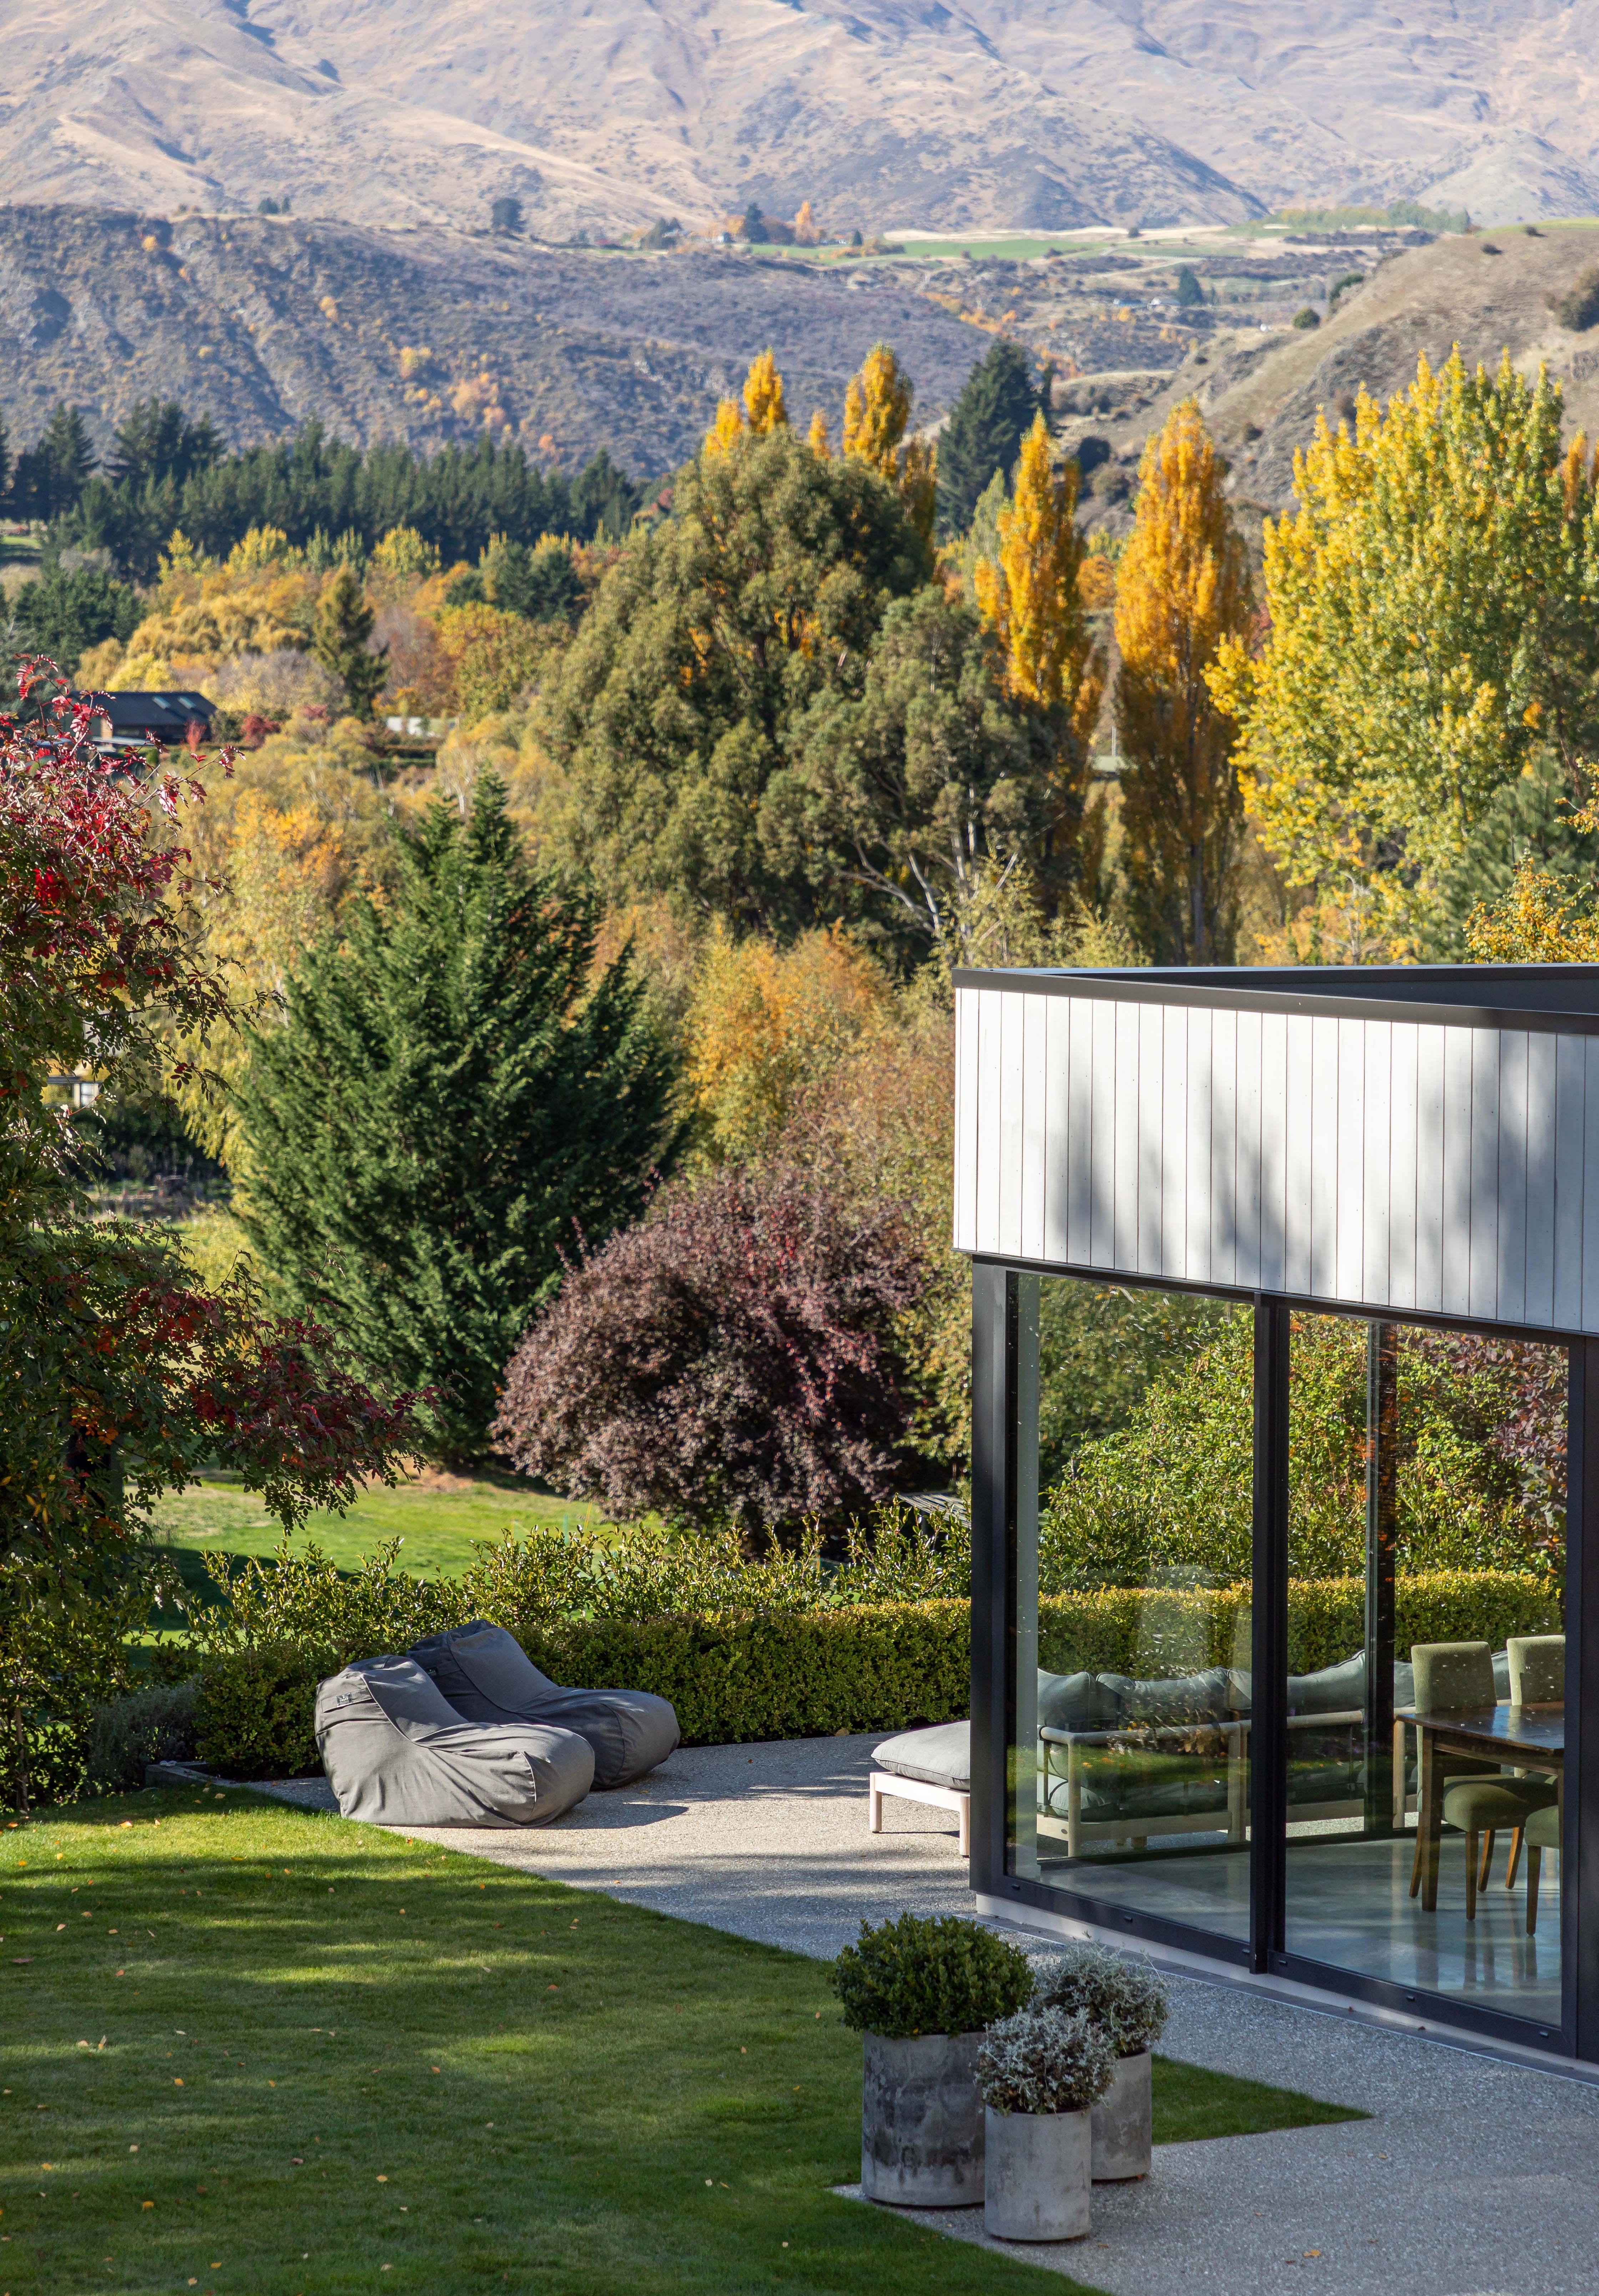 This simple landscaping plan at a Queenstown home designed by KOIA Architects utilises borrowed views of the dramatic surrounding alpine environment to enhance the private garden experience. Image: John Williams.